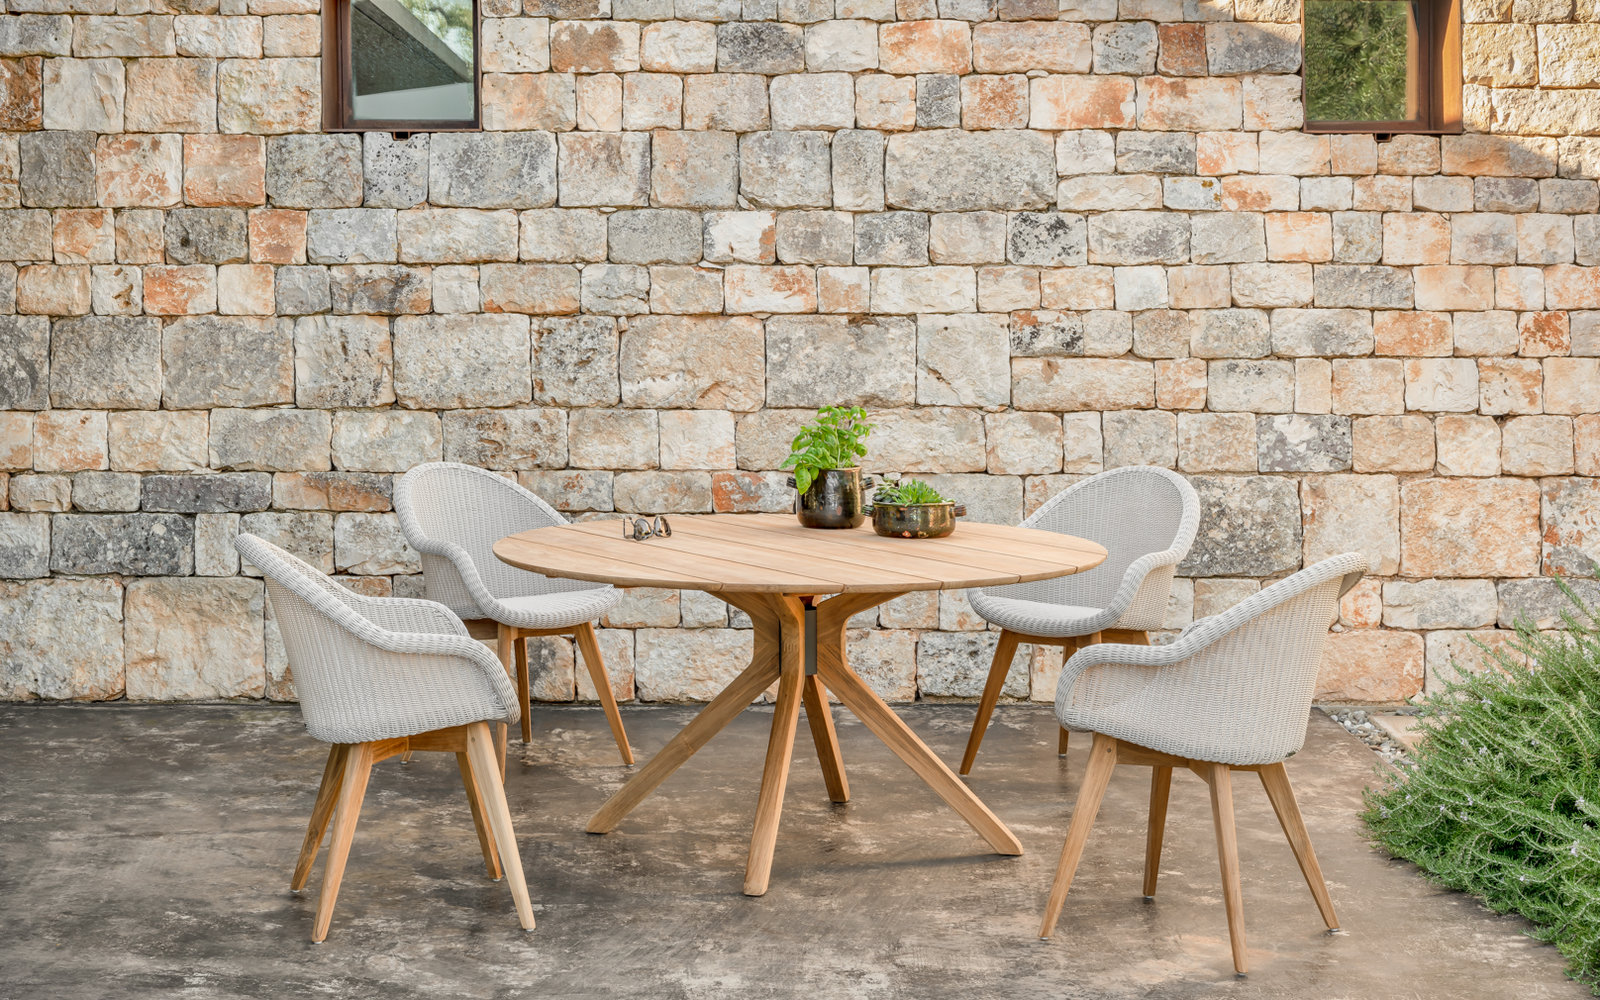 Edgard dining chairs en Noa dining table